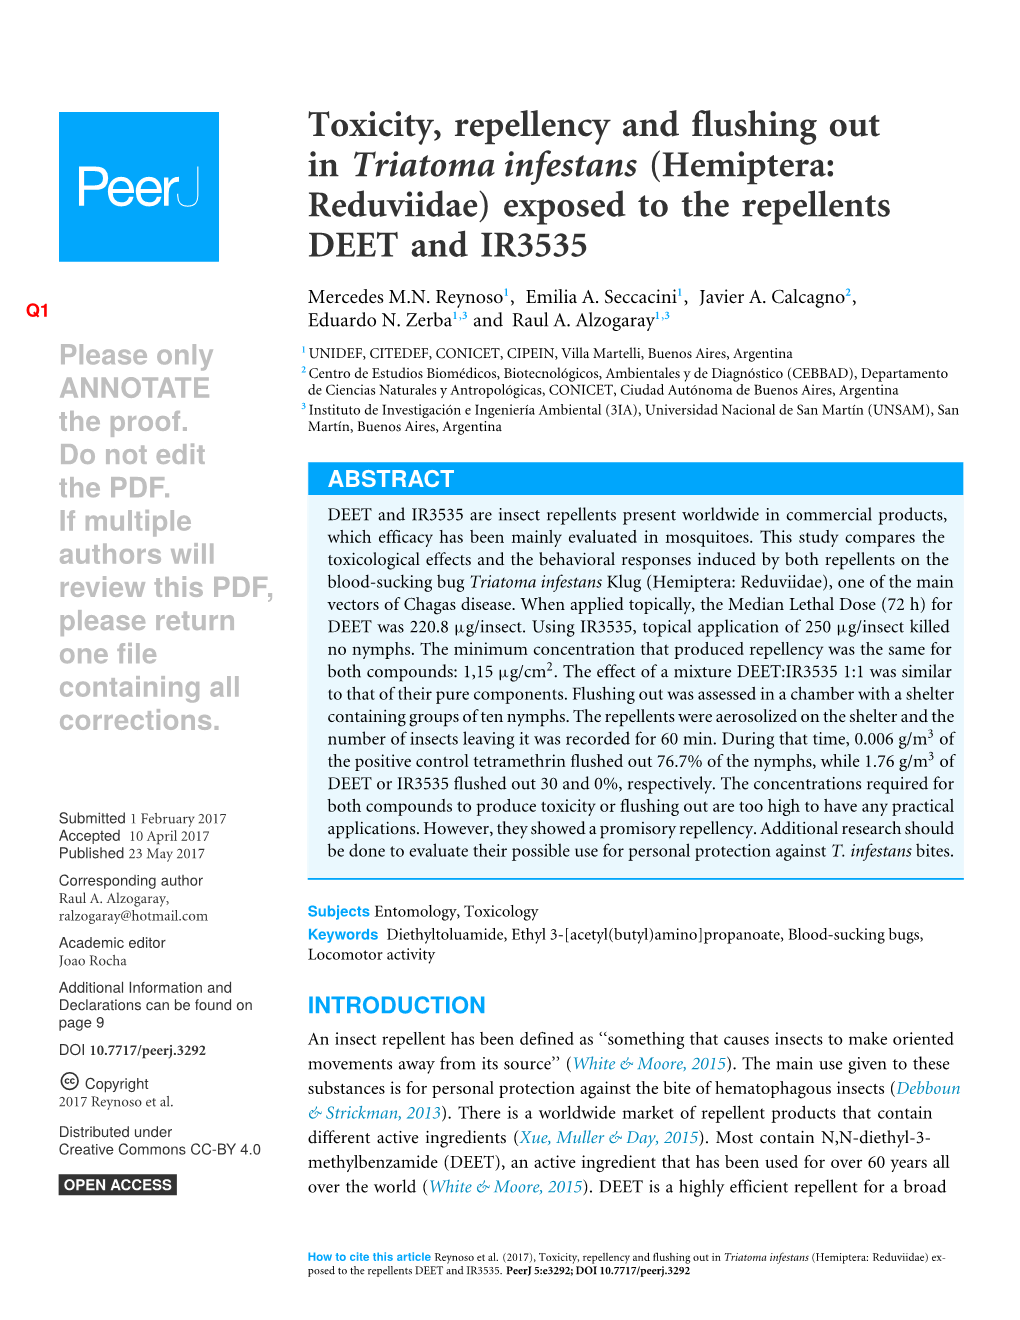 Toxicity, Repellency and Flushing out in Triatoma Infestans (Hemiptera: Reduviidae) Exposed to the Repellents DEET and IR3535